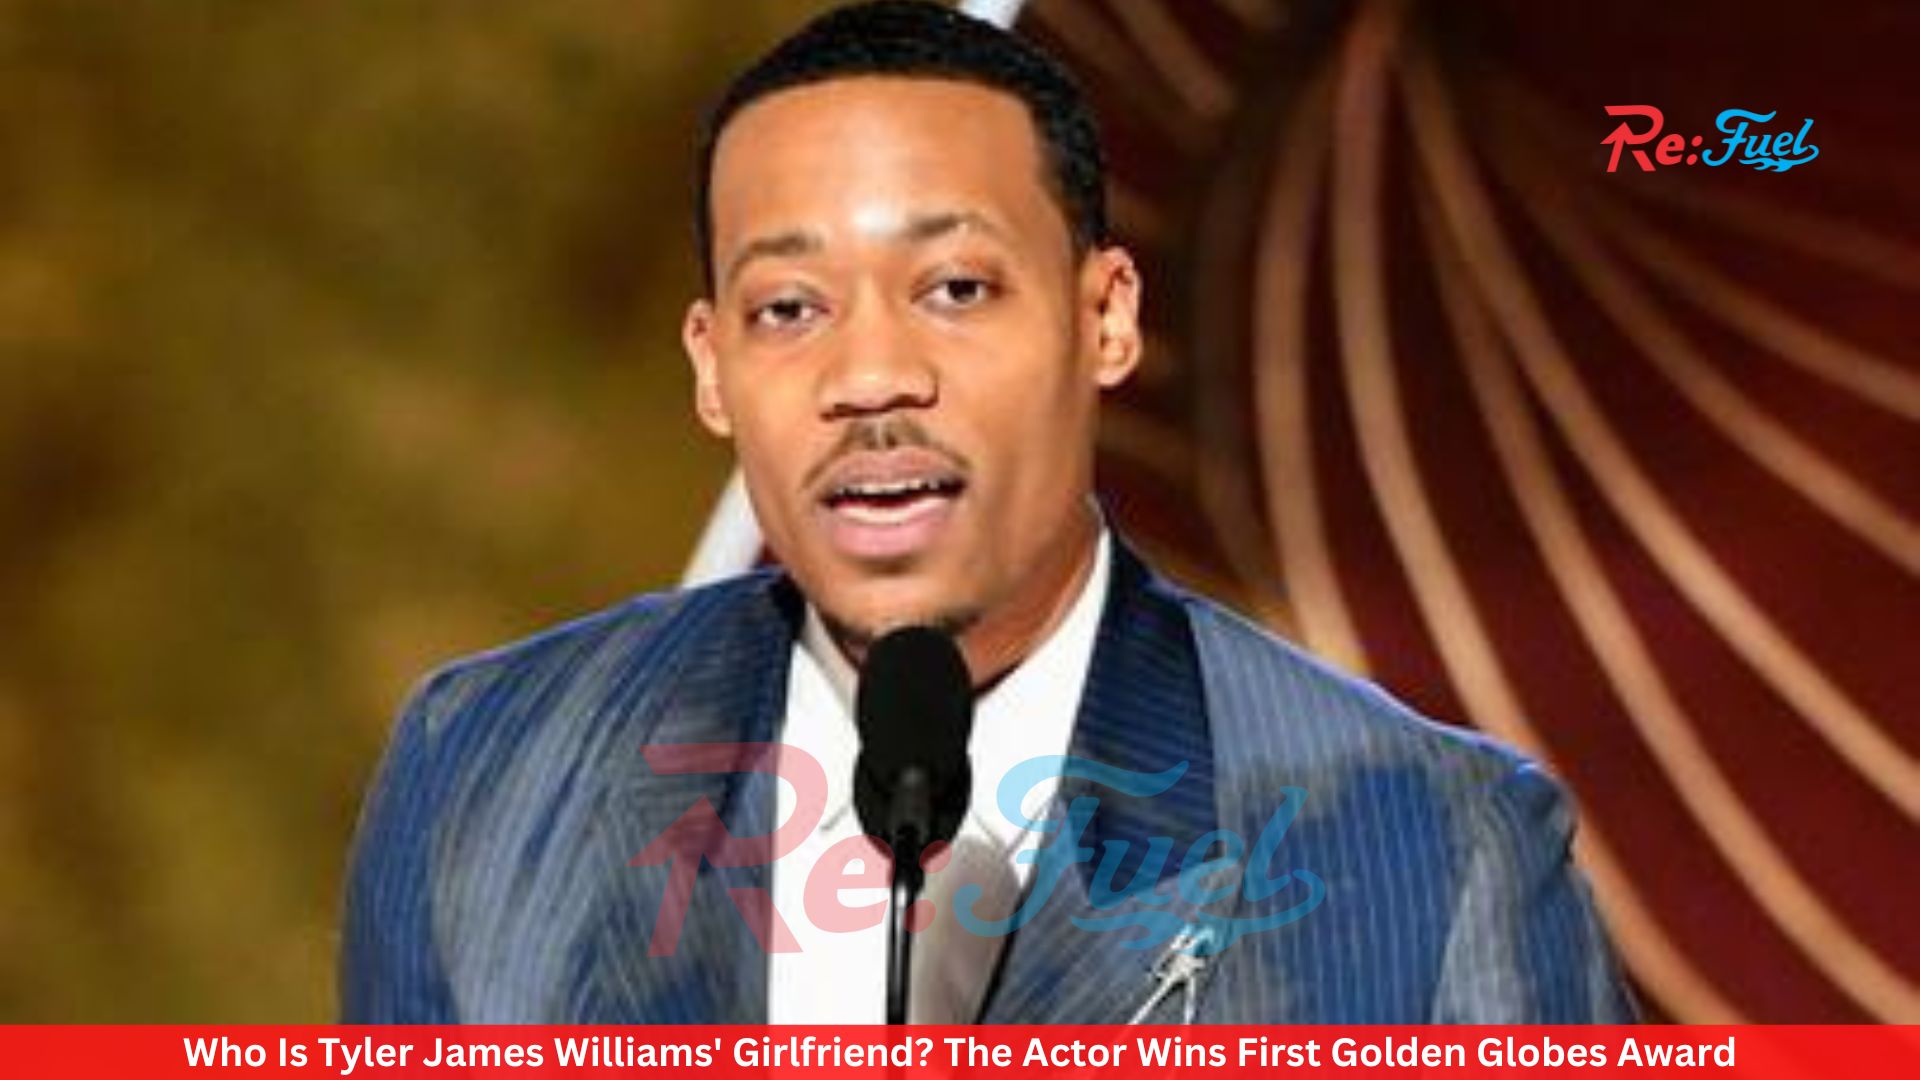 Who Is Tyler James Williams' Girlfriend? The Actor Wins First Golden Globes Award